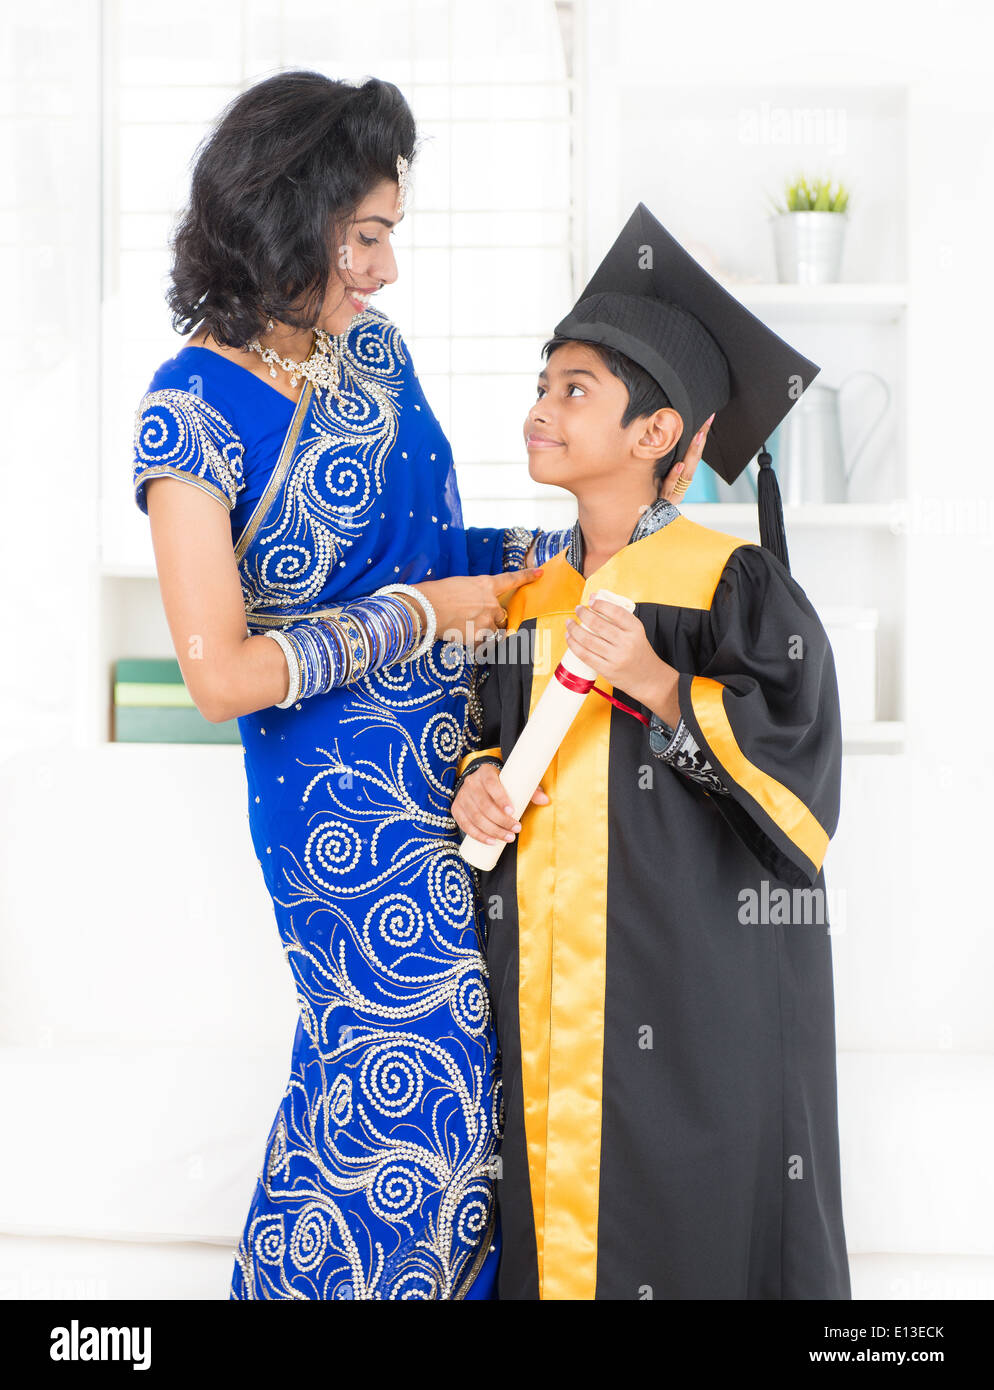 Kindergarten graduation. Asian family, Indian mother and son on kinder  graduate day Stock Photo - Alamy